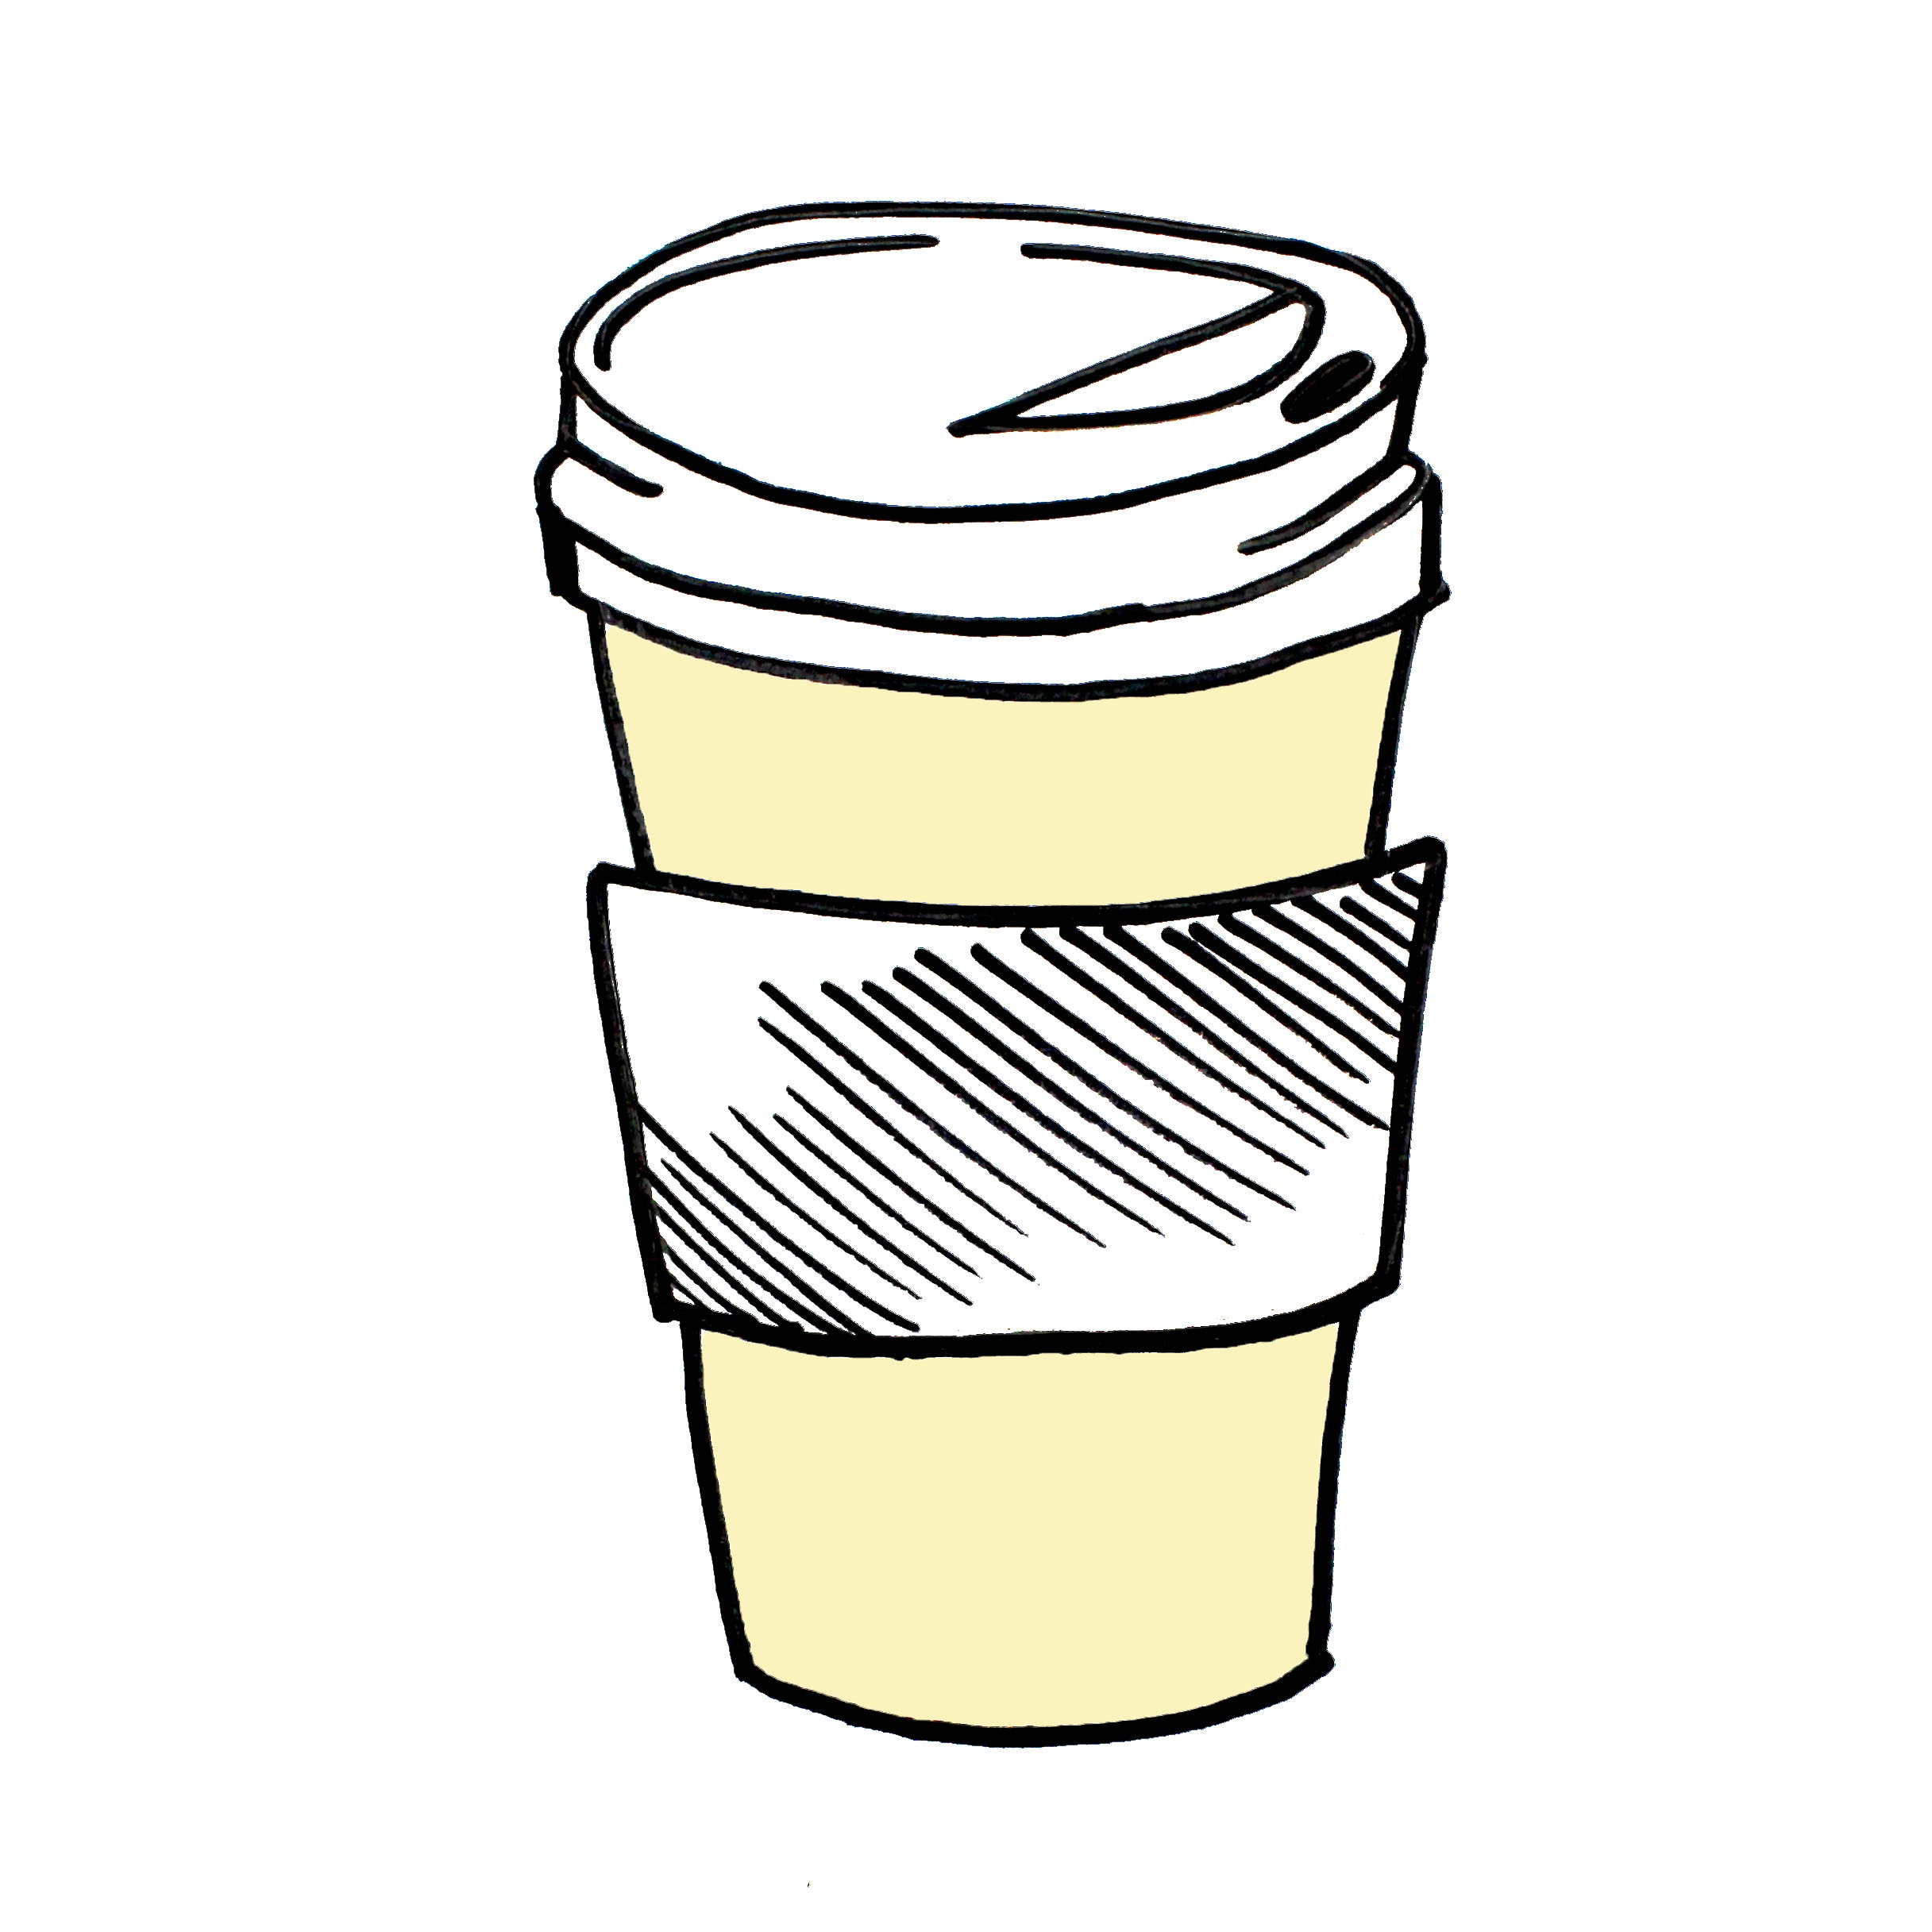 Anatomy of a To Go Cup — The Little Black Coffee Cup